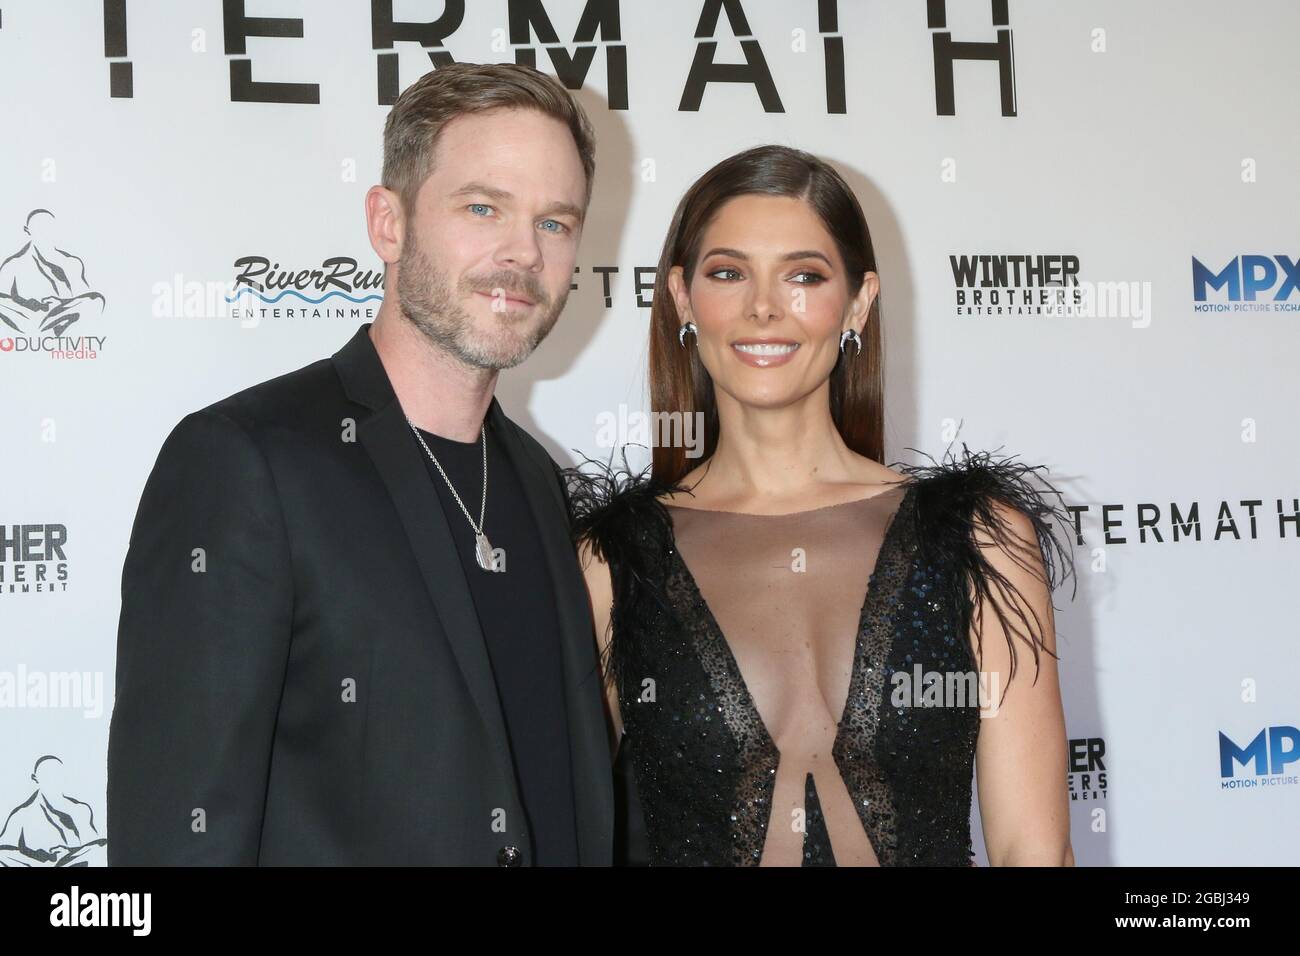 3 août 2021, Westwood, CA, USA: LOS ANGELES - 3 AOÛT: Shawn Ashmore, Ashley Greene at the Aftermath Premiere at the Landmark Theatre on 3 août 2021 in Westwood, CA (Credit image: © Kay Blake/ZUMA Press Wire) Banque D'Images